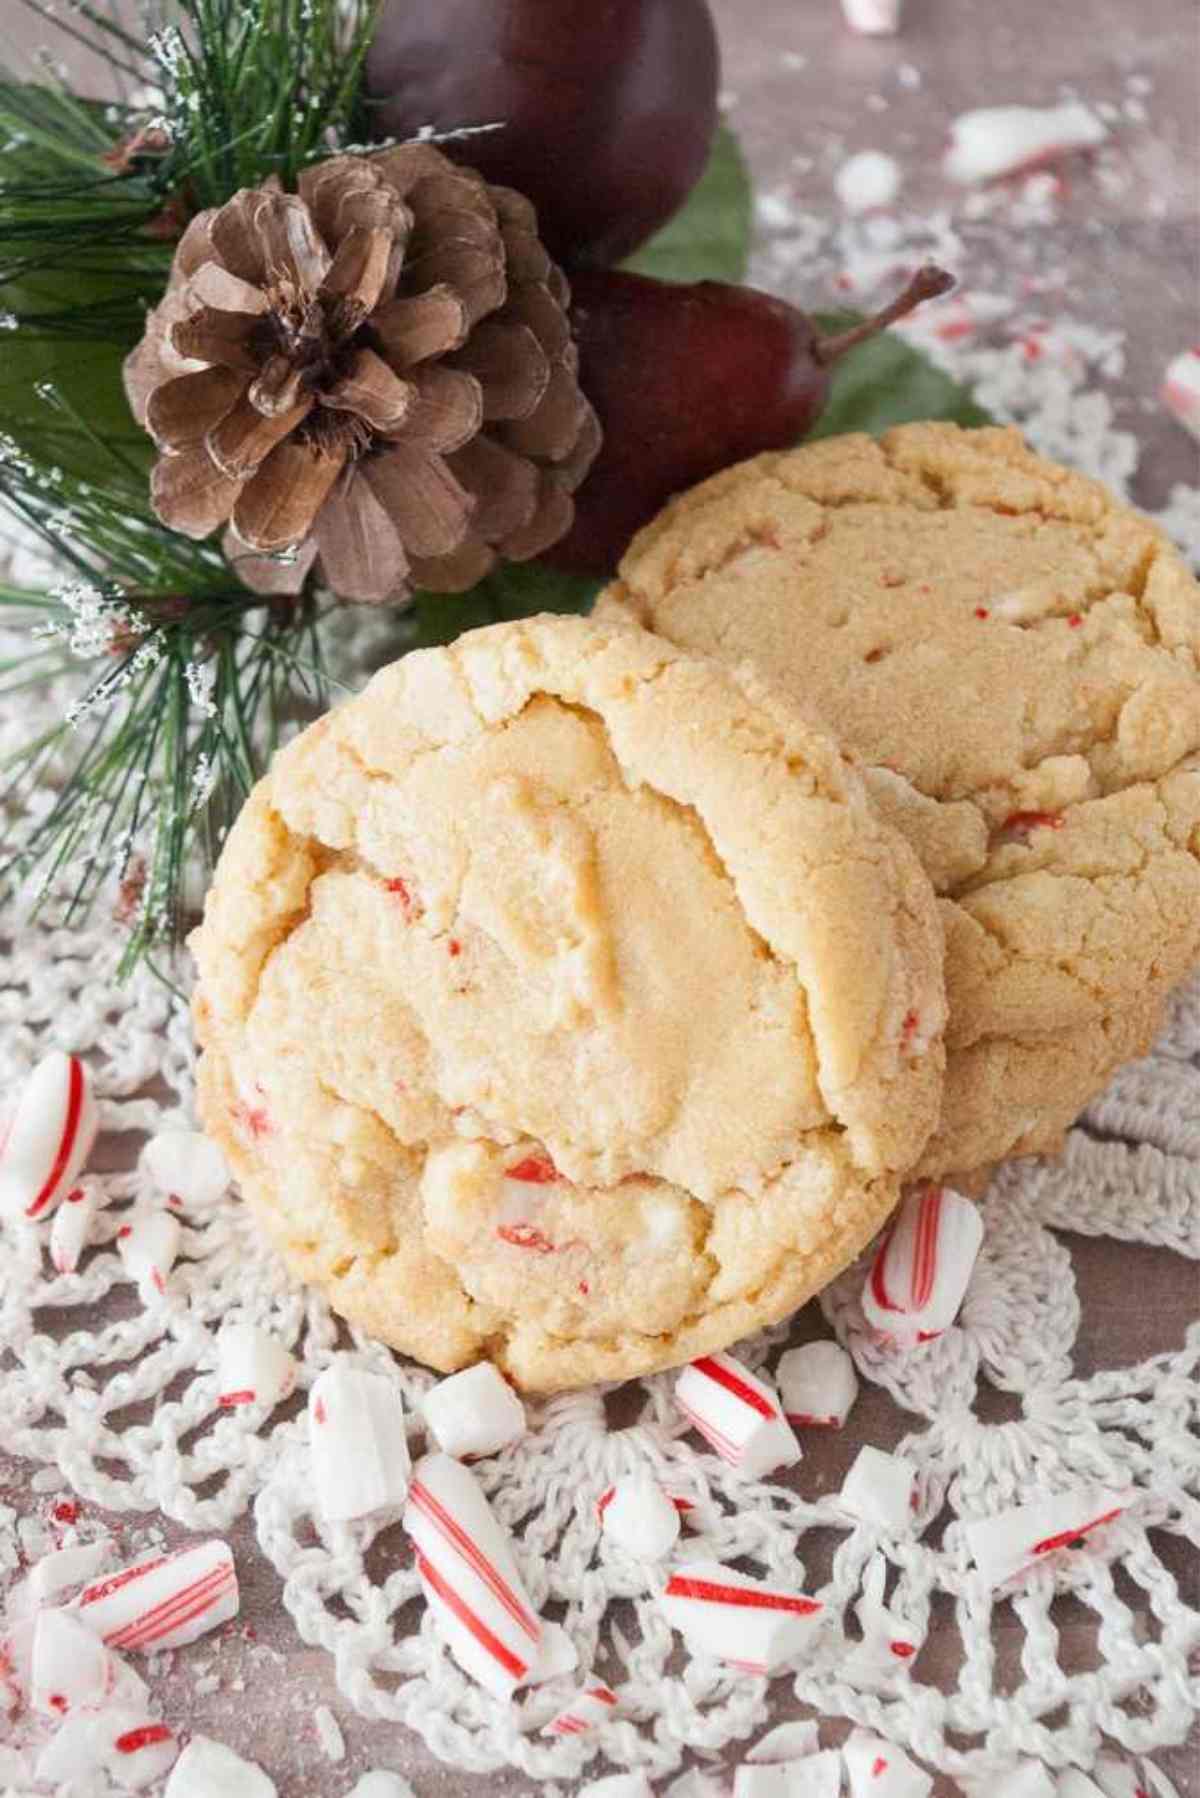 Candy Cane cookies on a doily garnished with candy cane pieces.